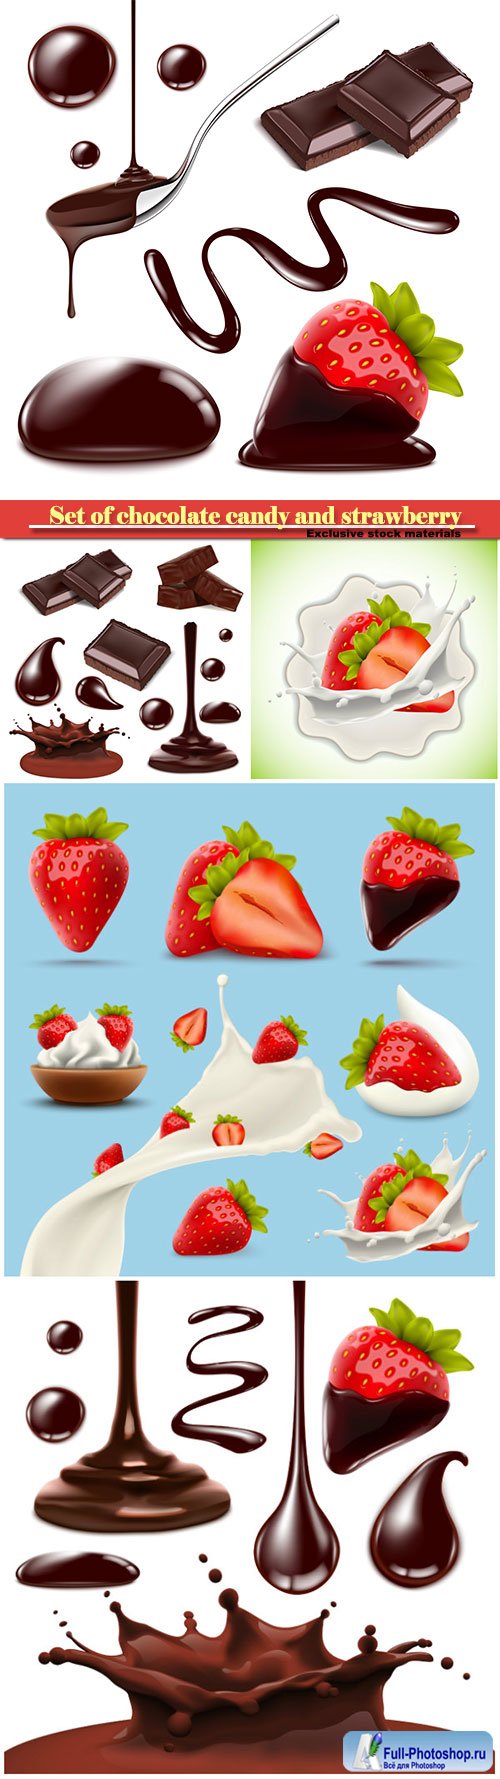 Set of chocolate candy and strawberry in vector